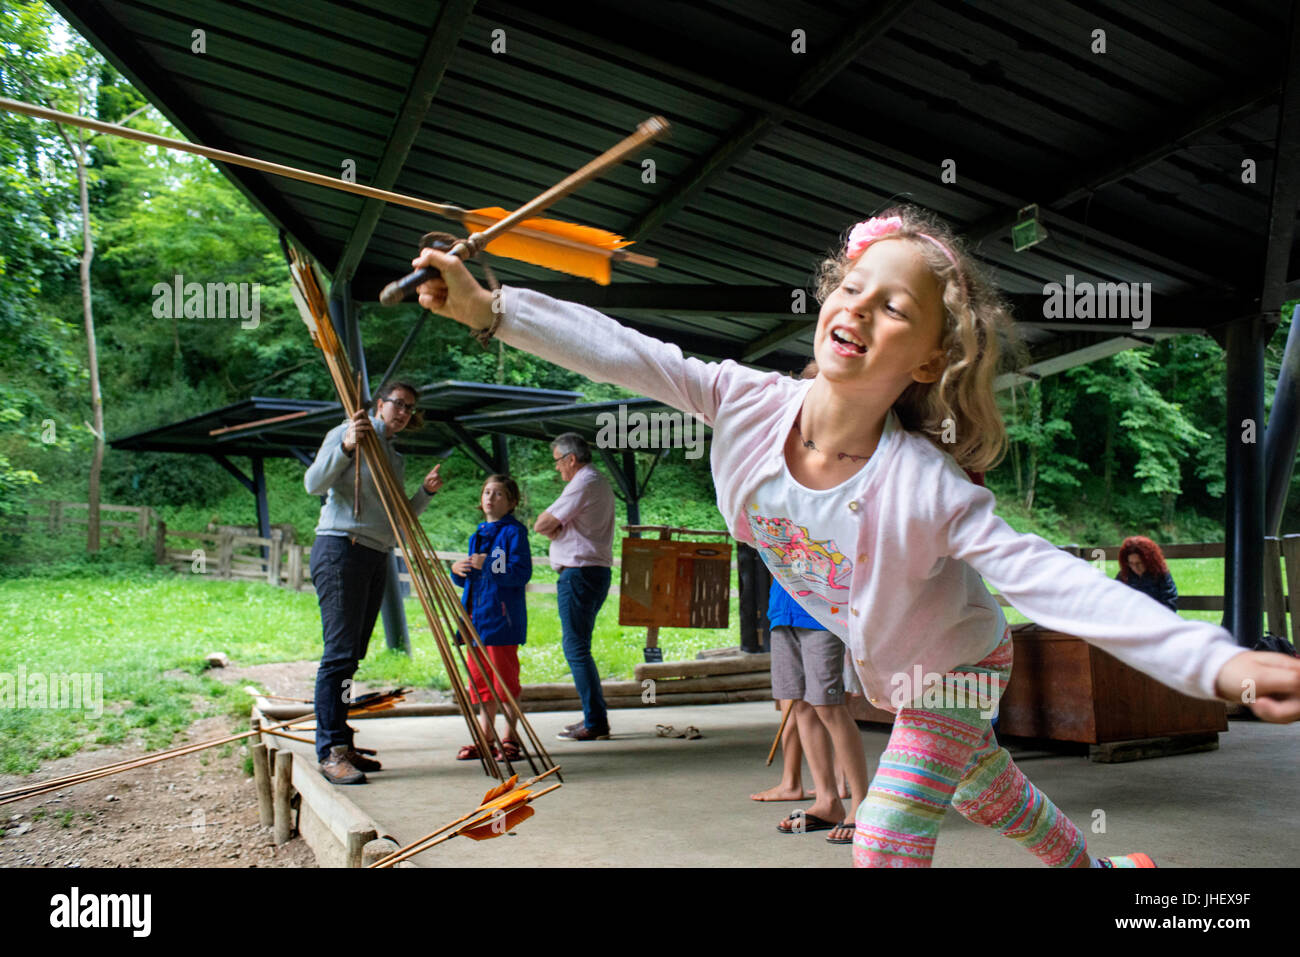 Prehistoric Park, Museographic Area, Tarascon, Ariege, France. Family with children learn to use spear-thrower. Stock Photo